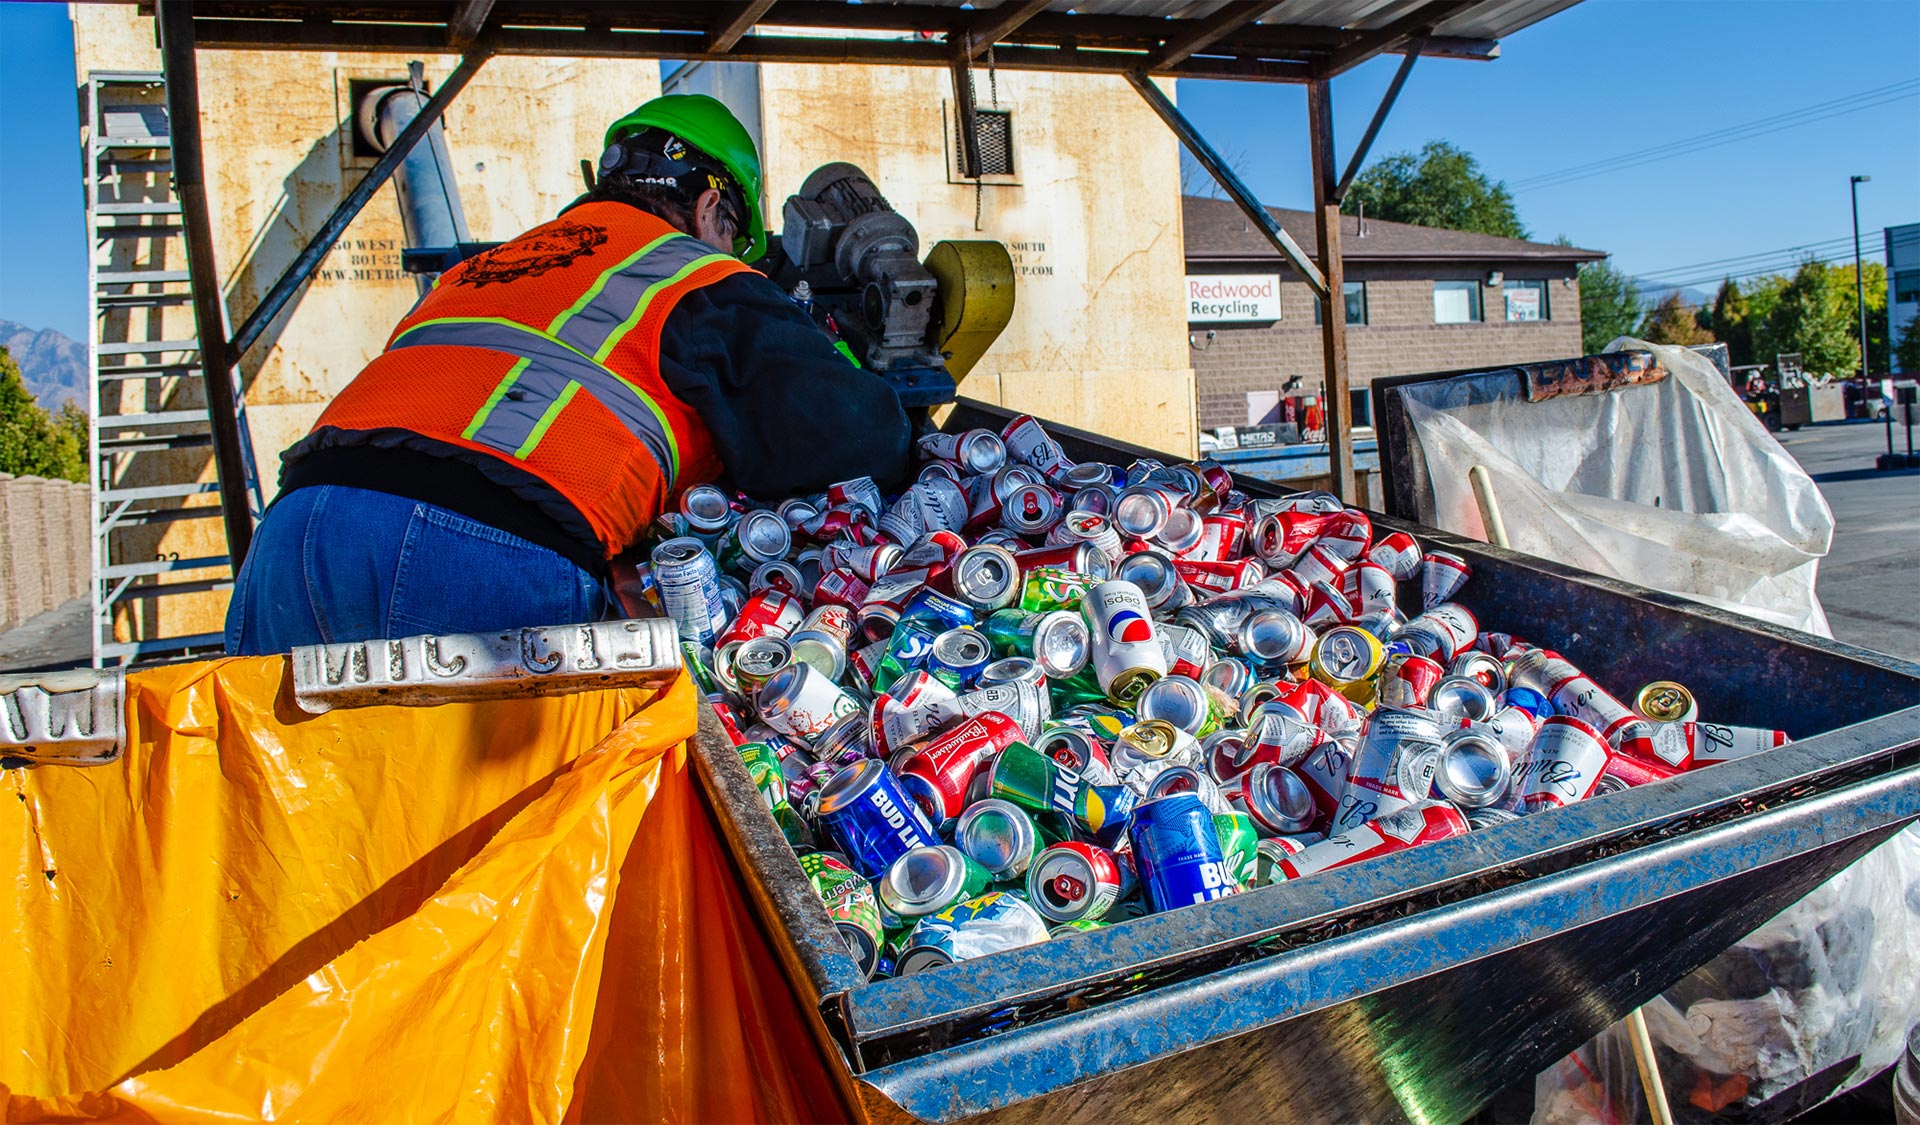 A worker in orange and safety vest loads cans into a truck, ensuring safety and efficiency.